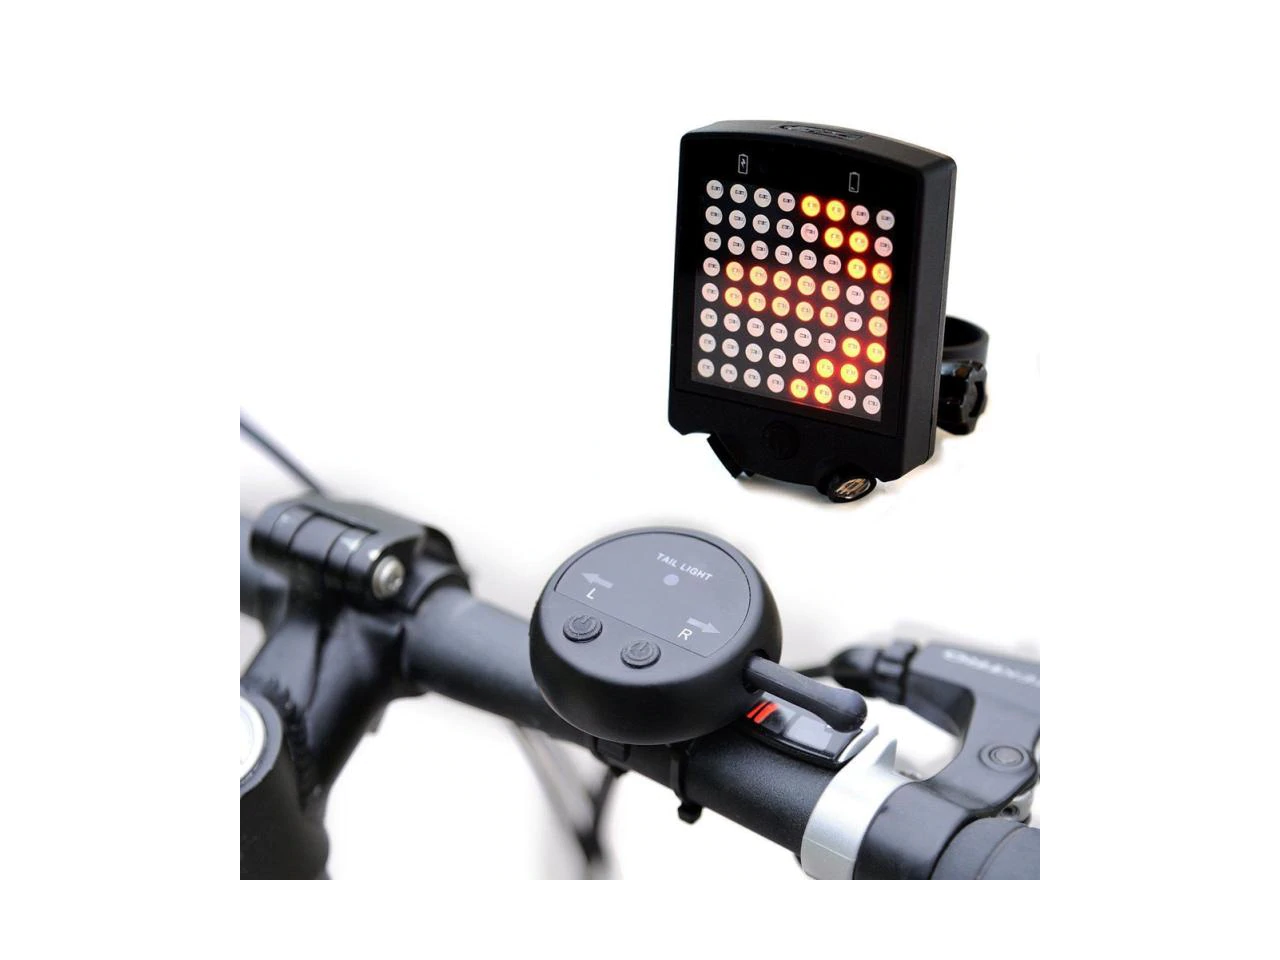 usb rechargeable bicycle tail light